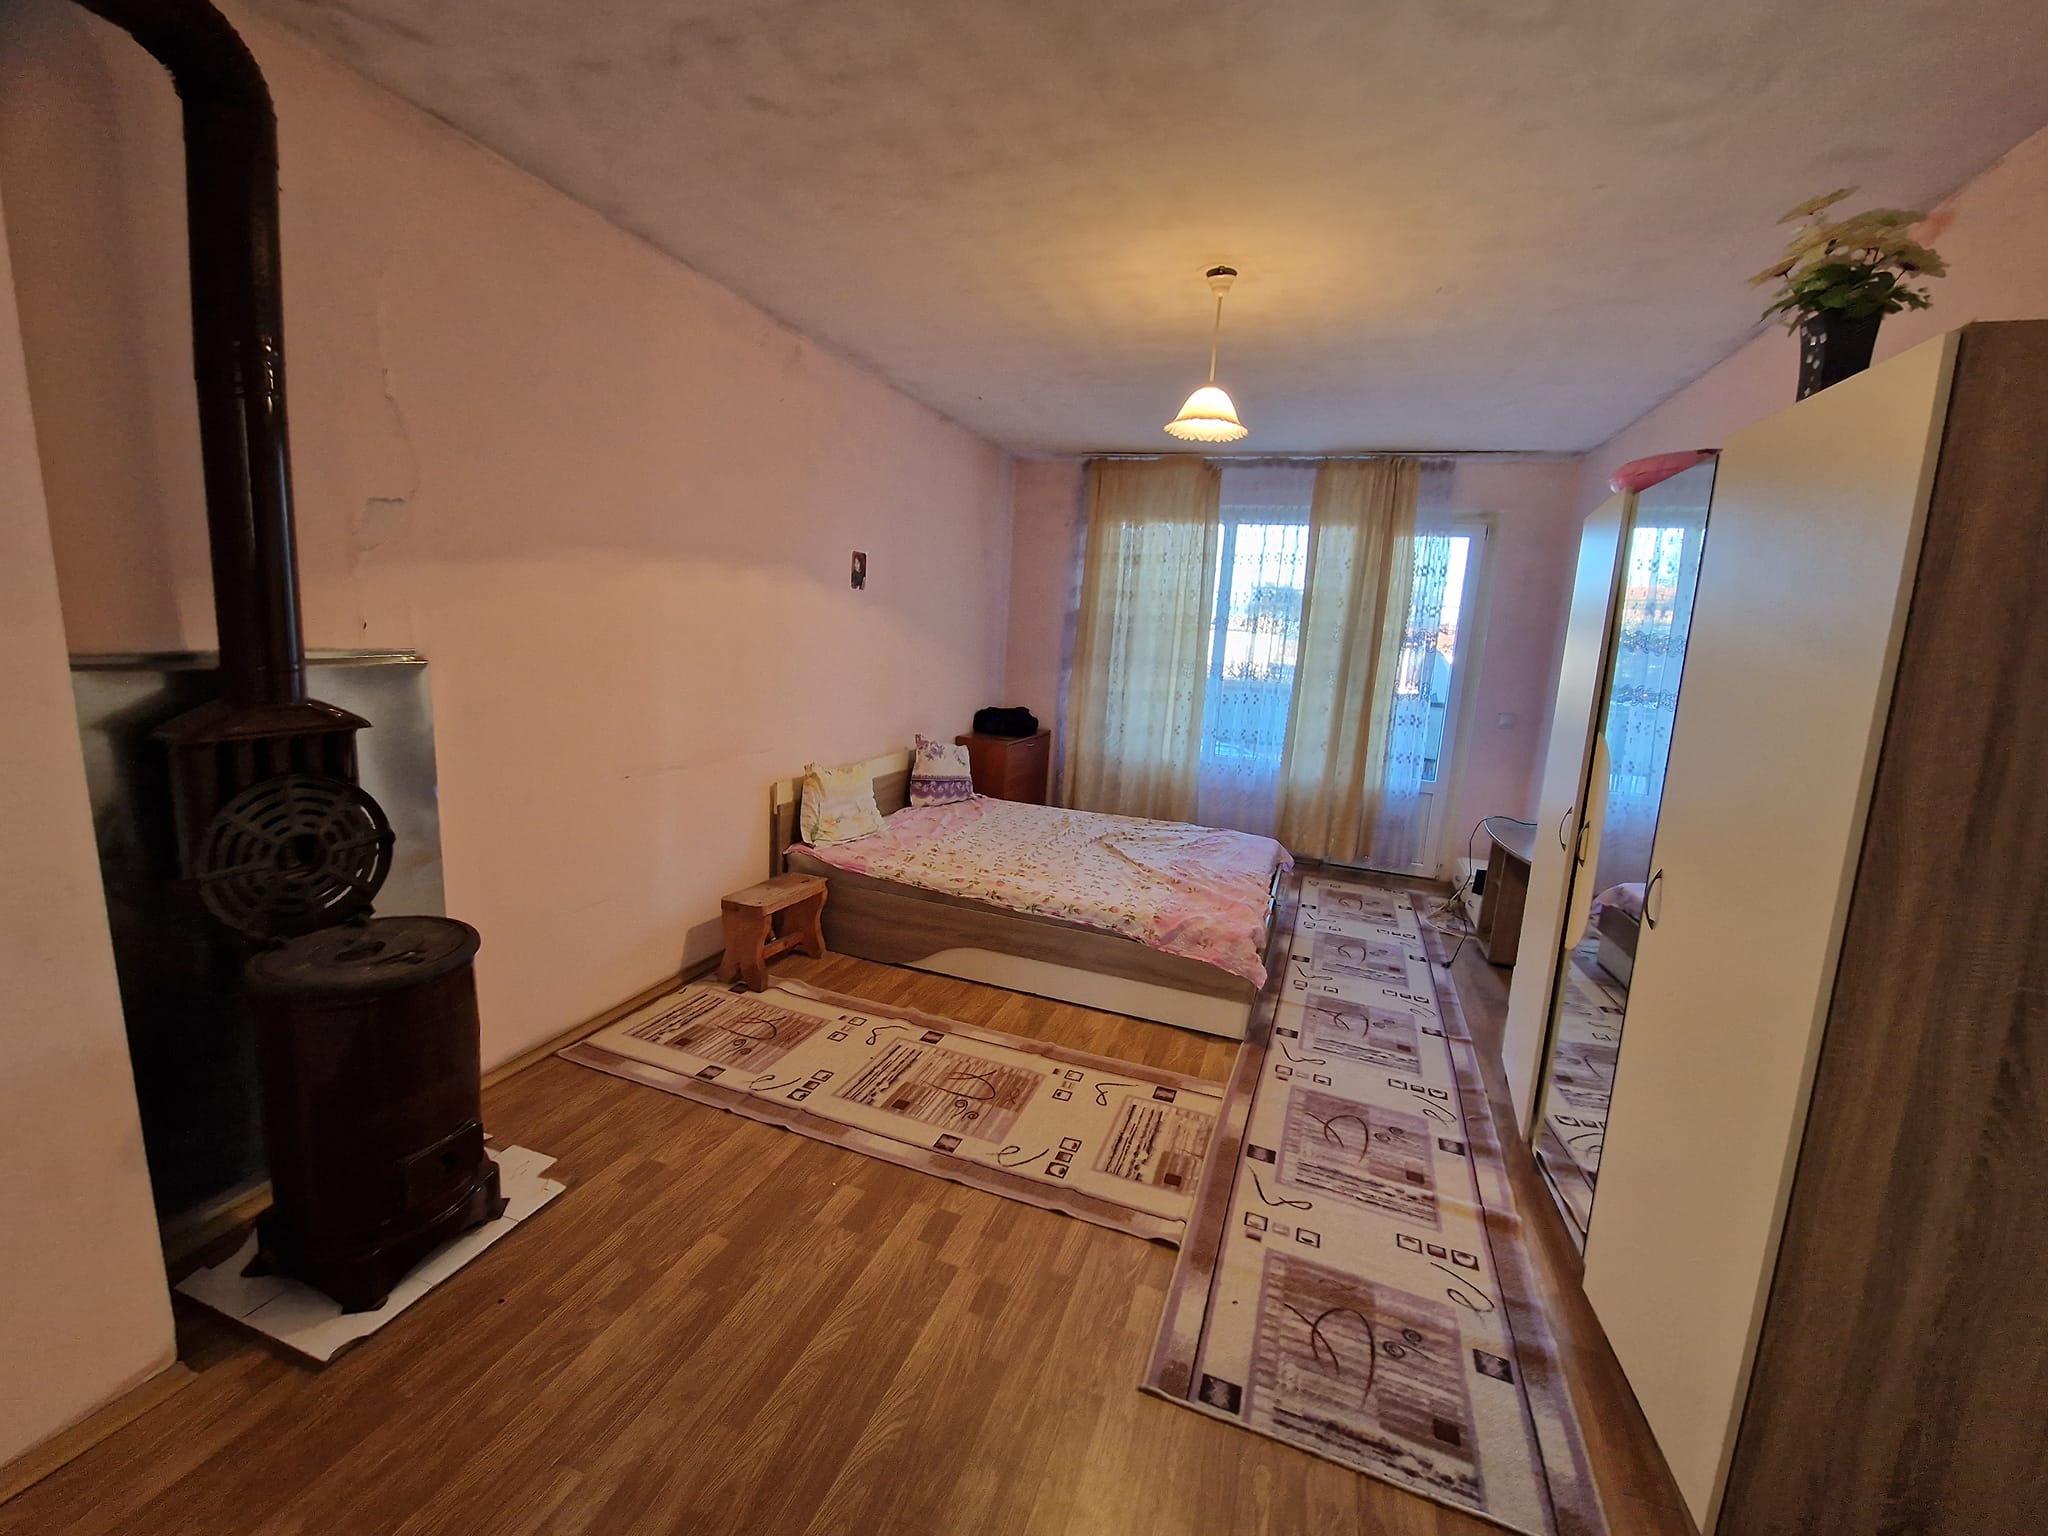 For sale in Razlog: Spacious multi-room apartment with two terraces